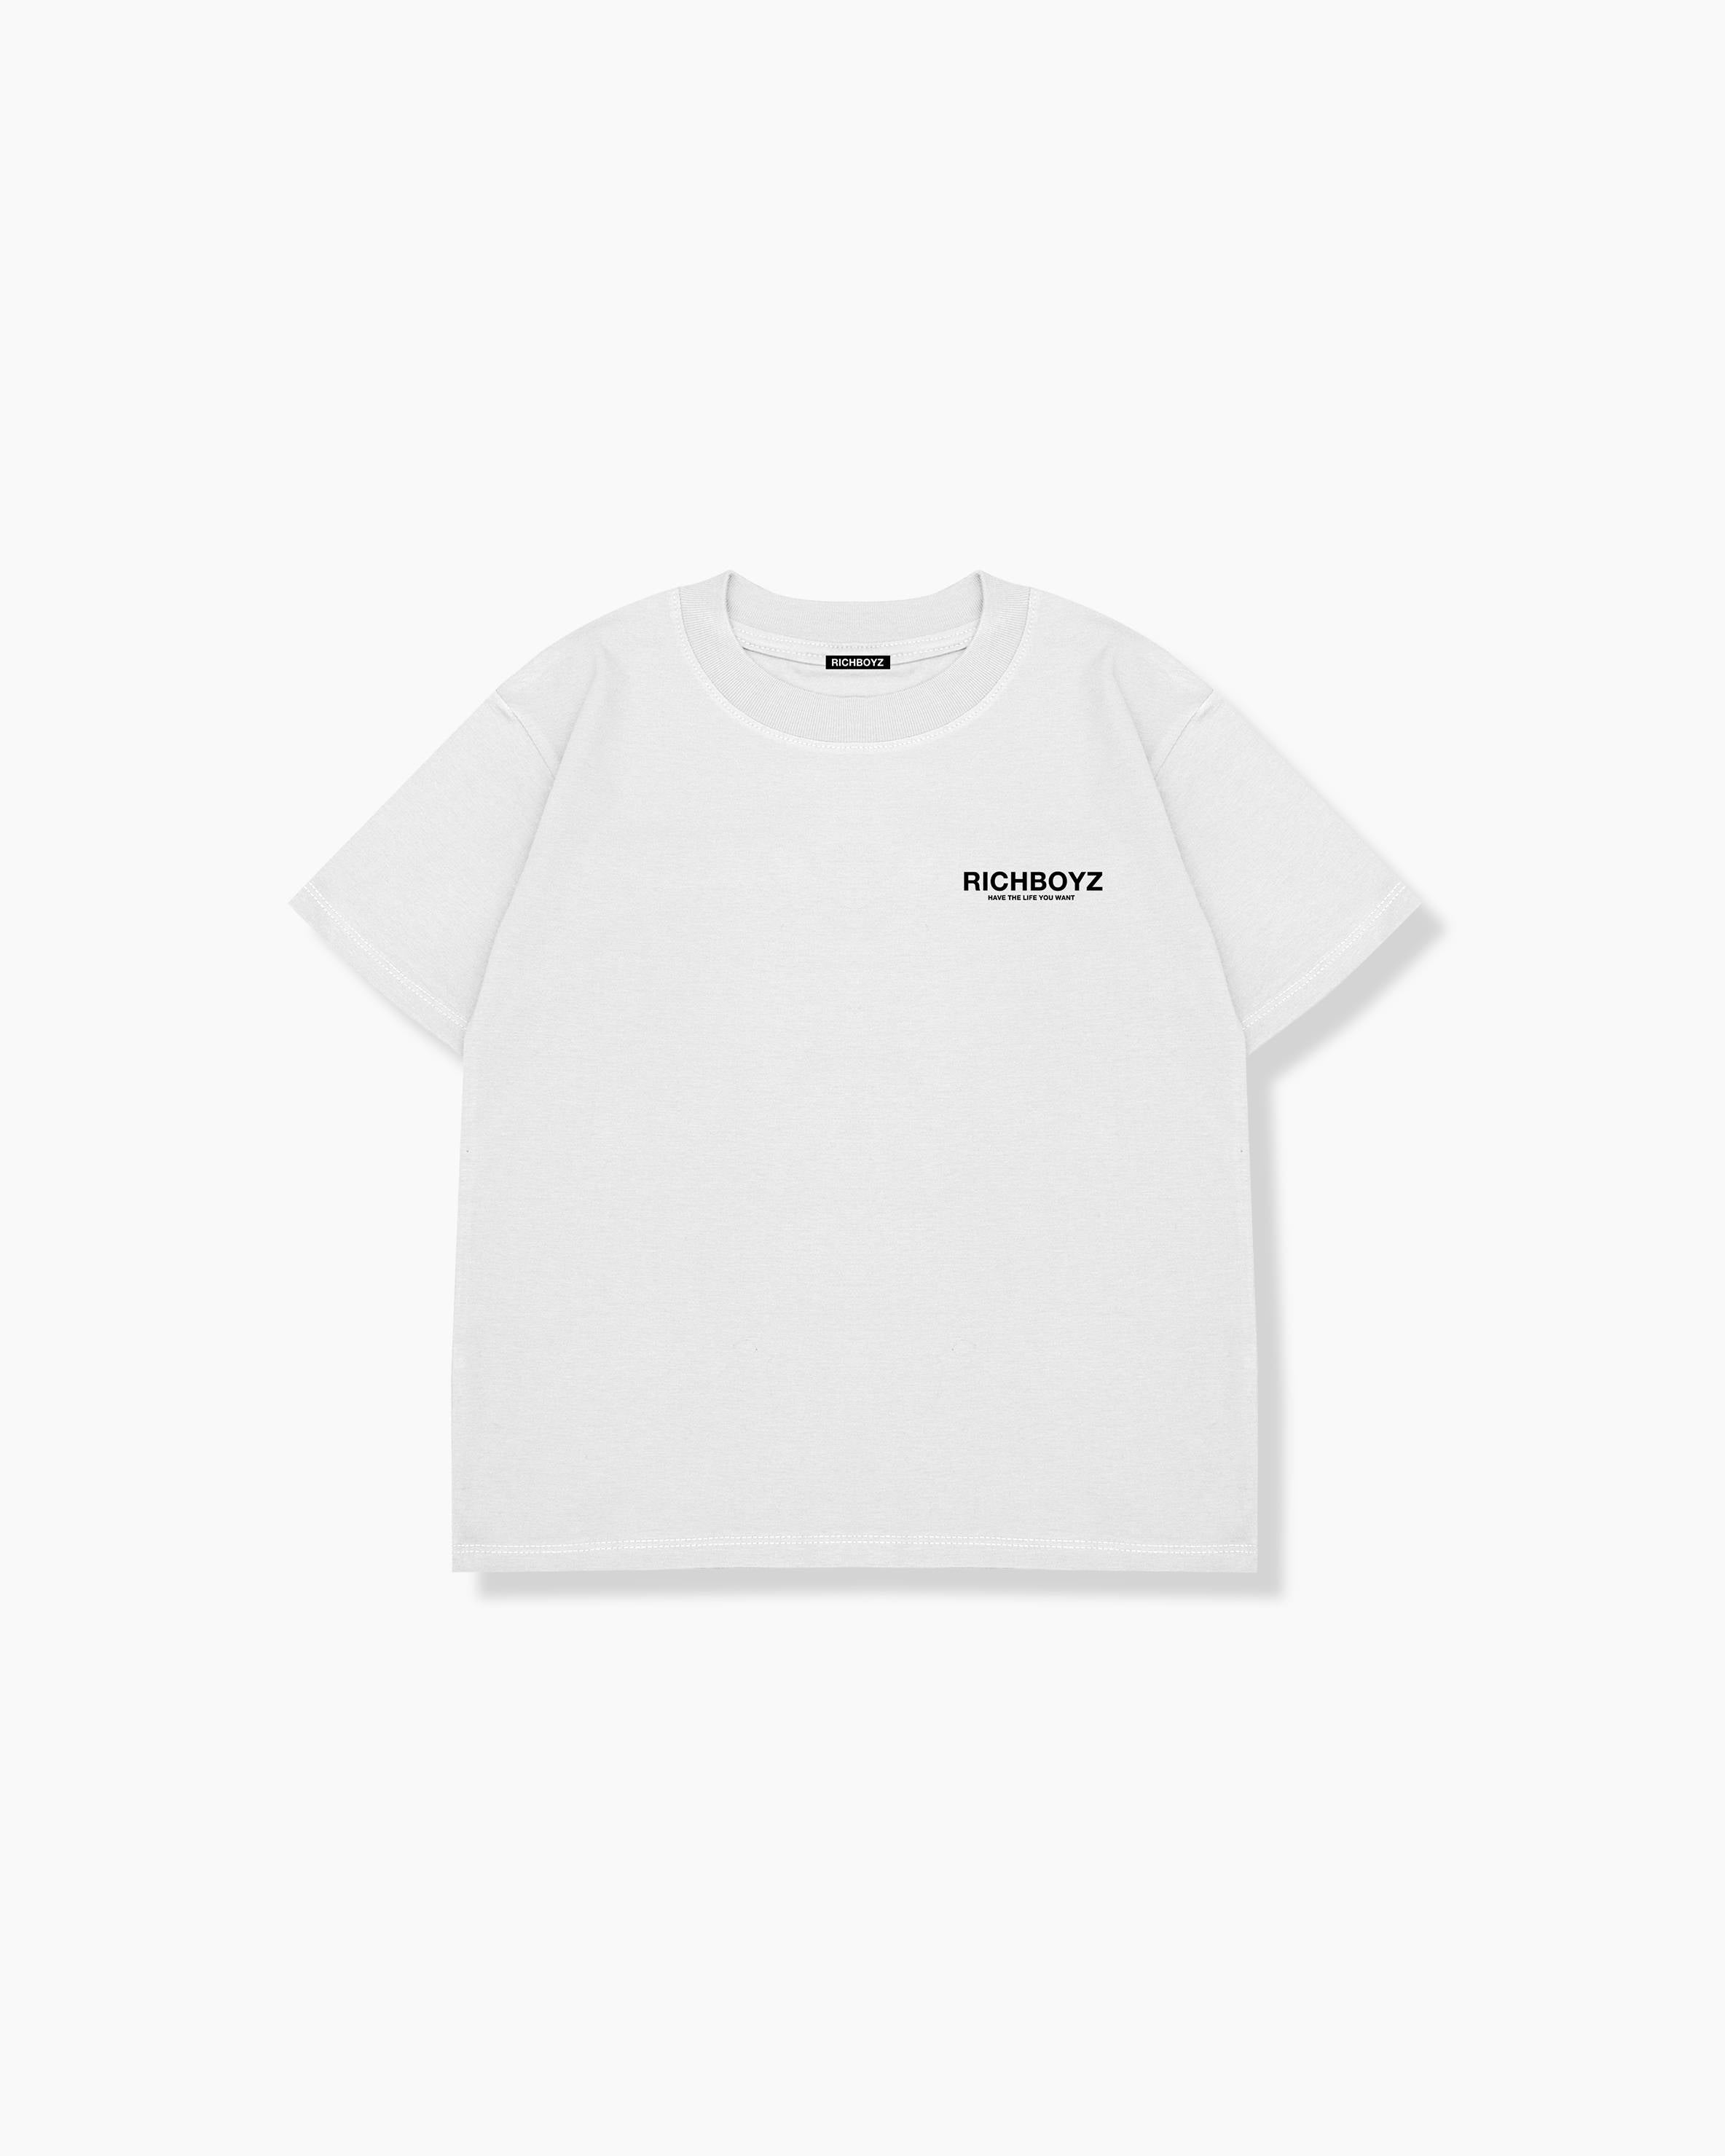 KIDZ RELAXED DROP SHOULDER TEE - CLASSIC WHITE